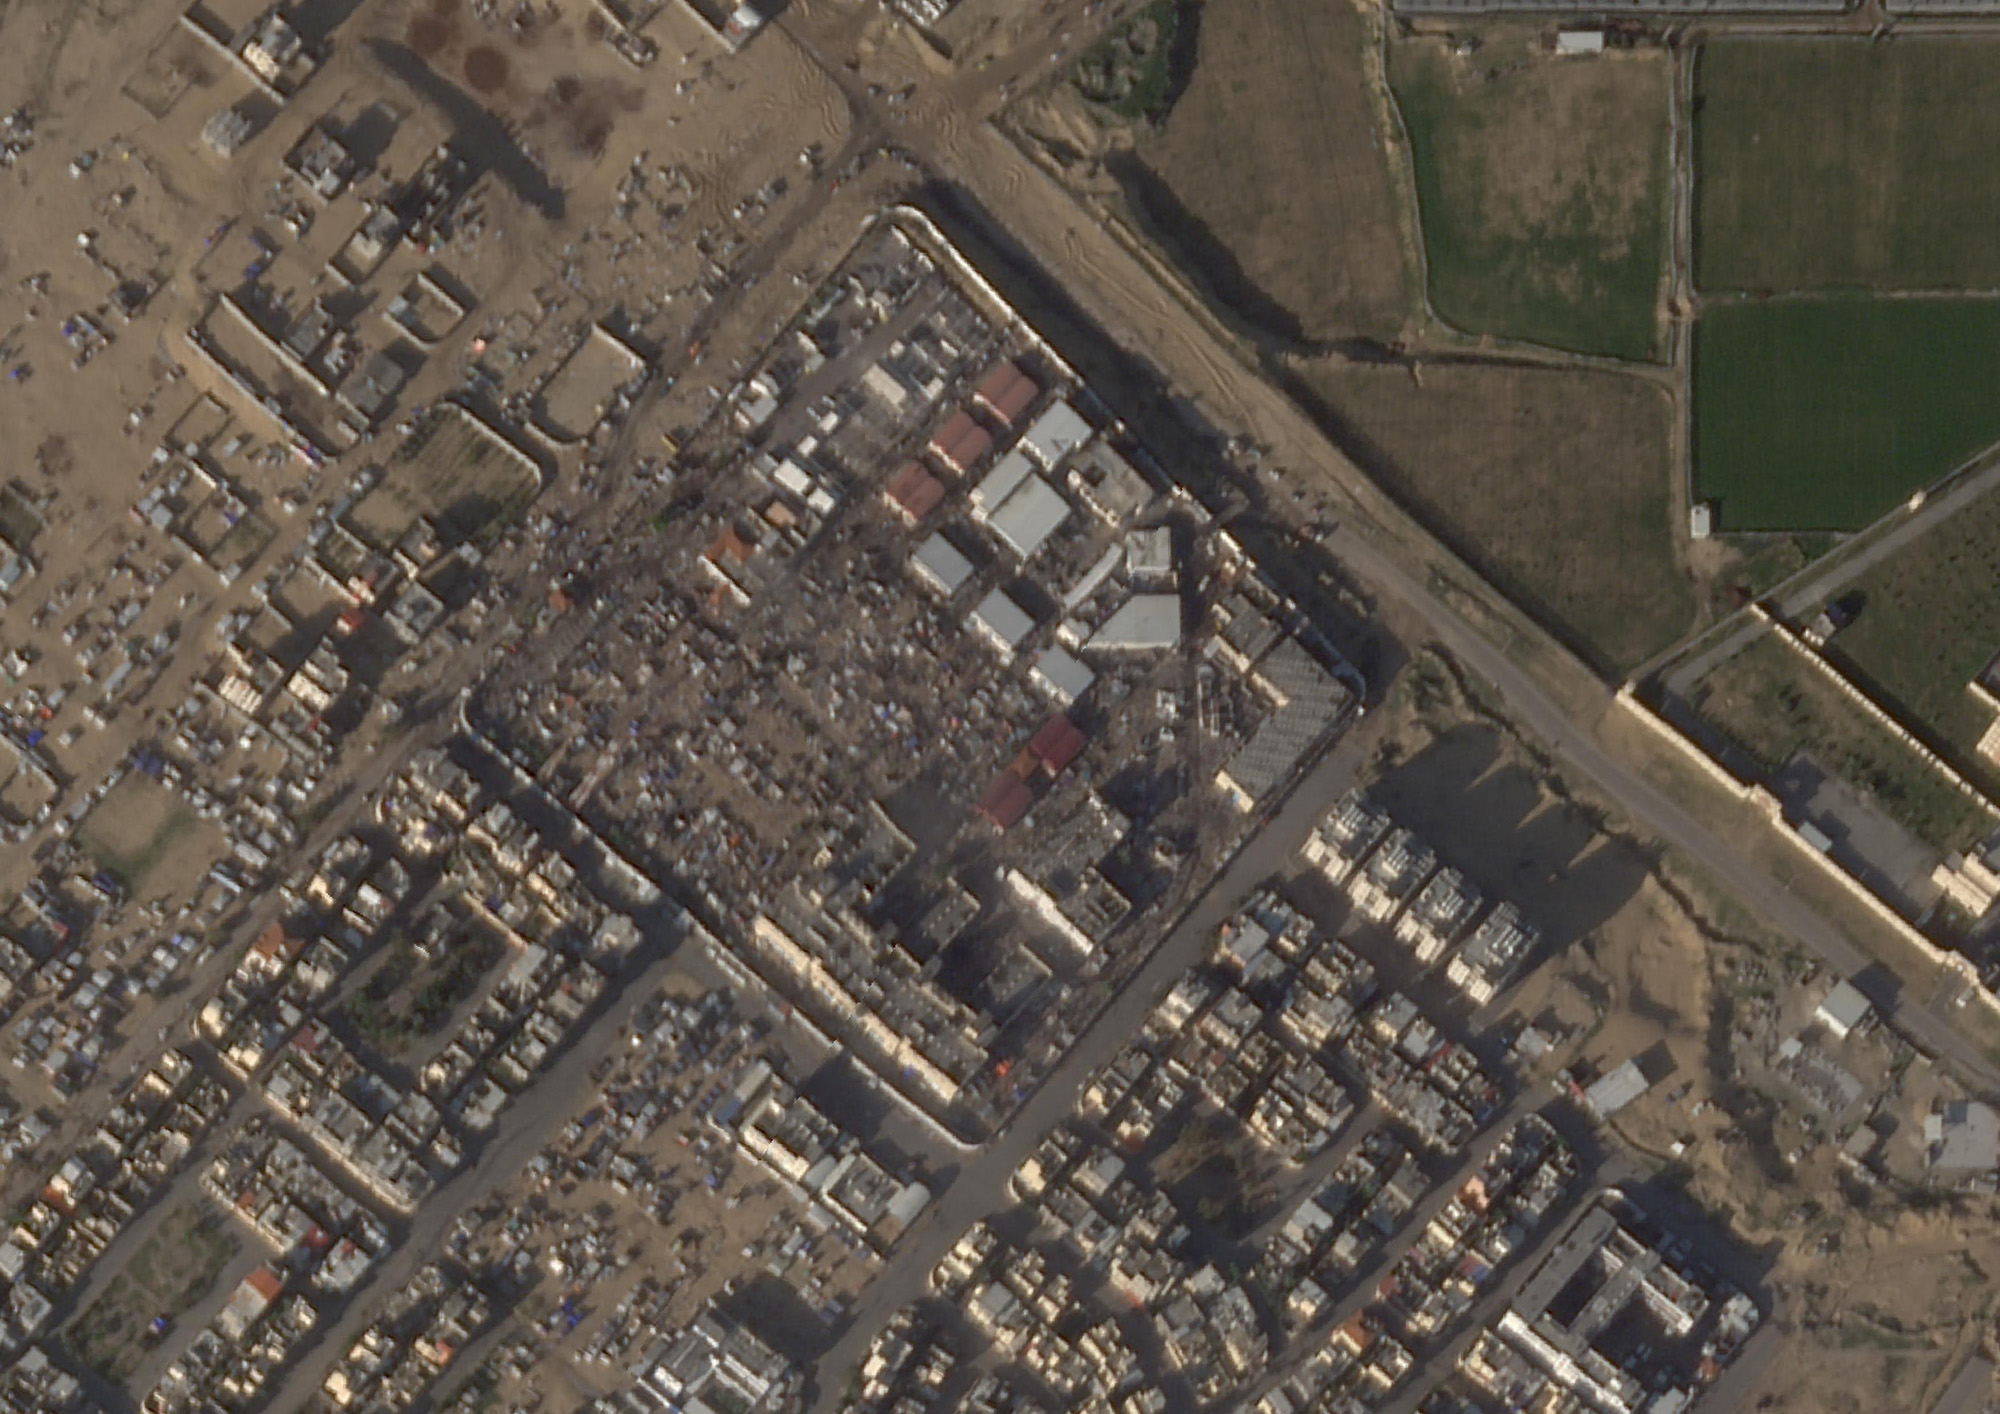 The same area on January 29 shows the tents have gone.